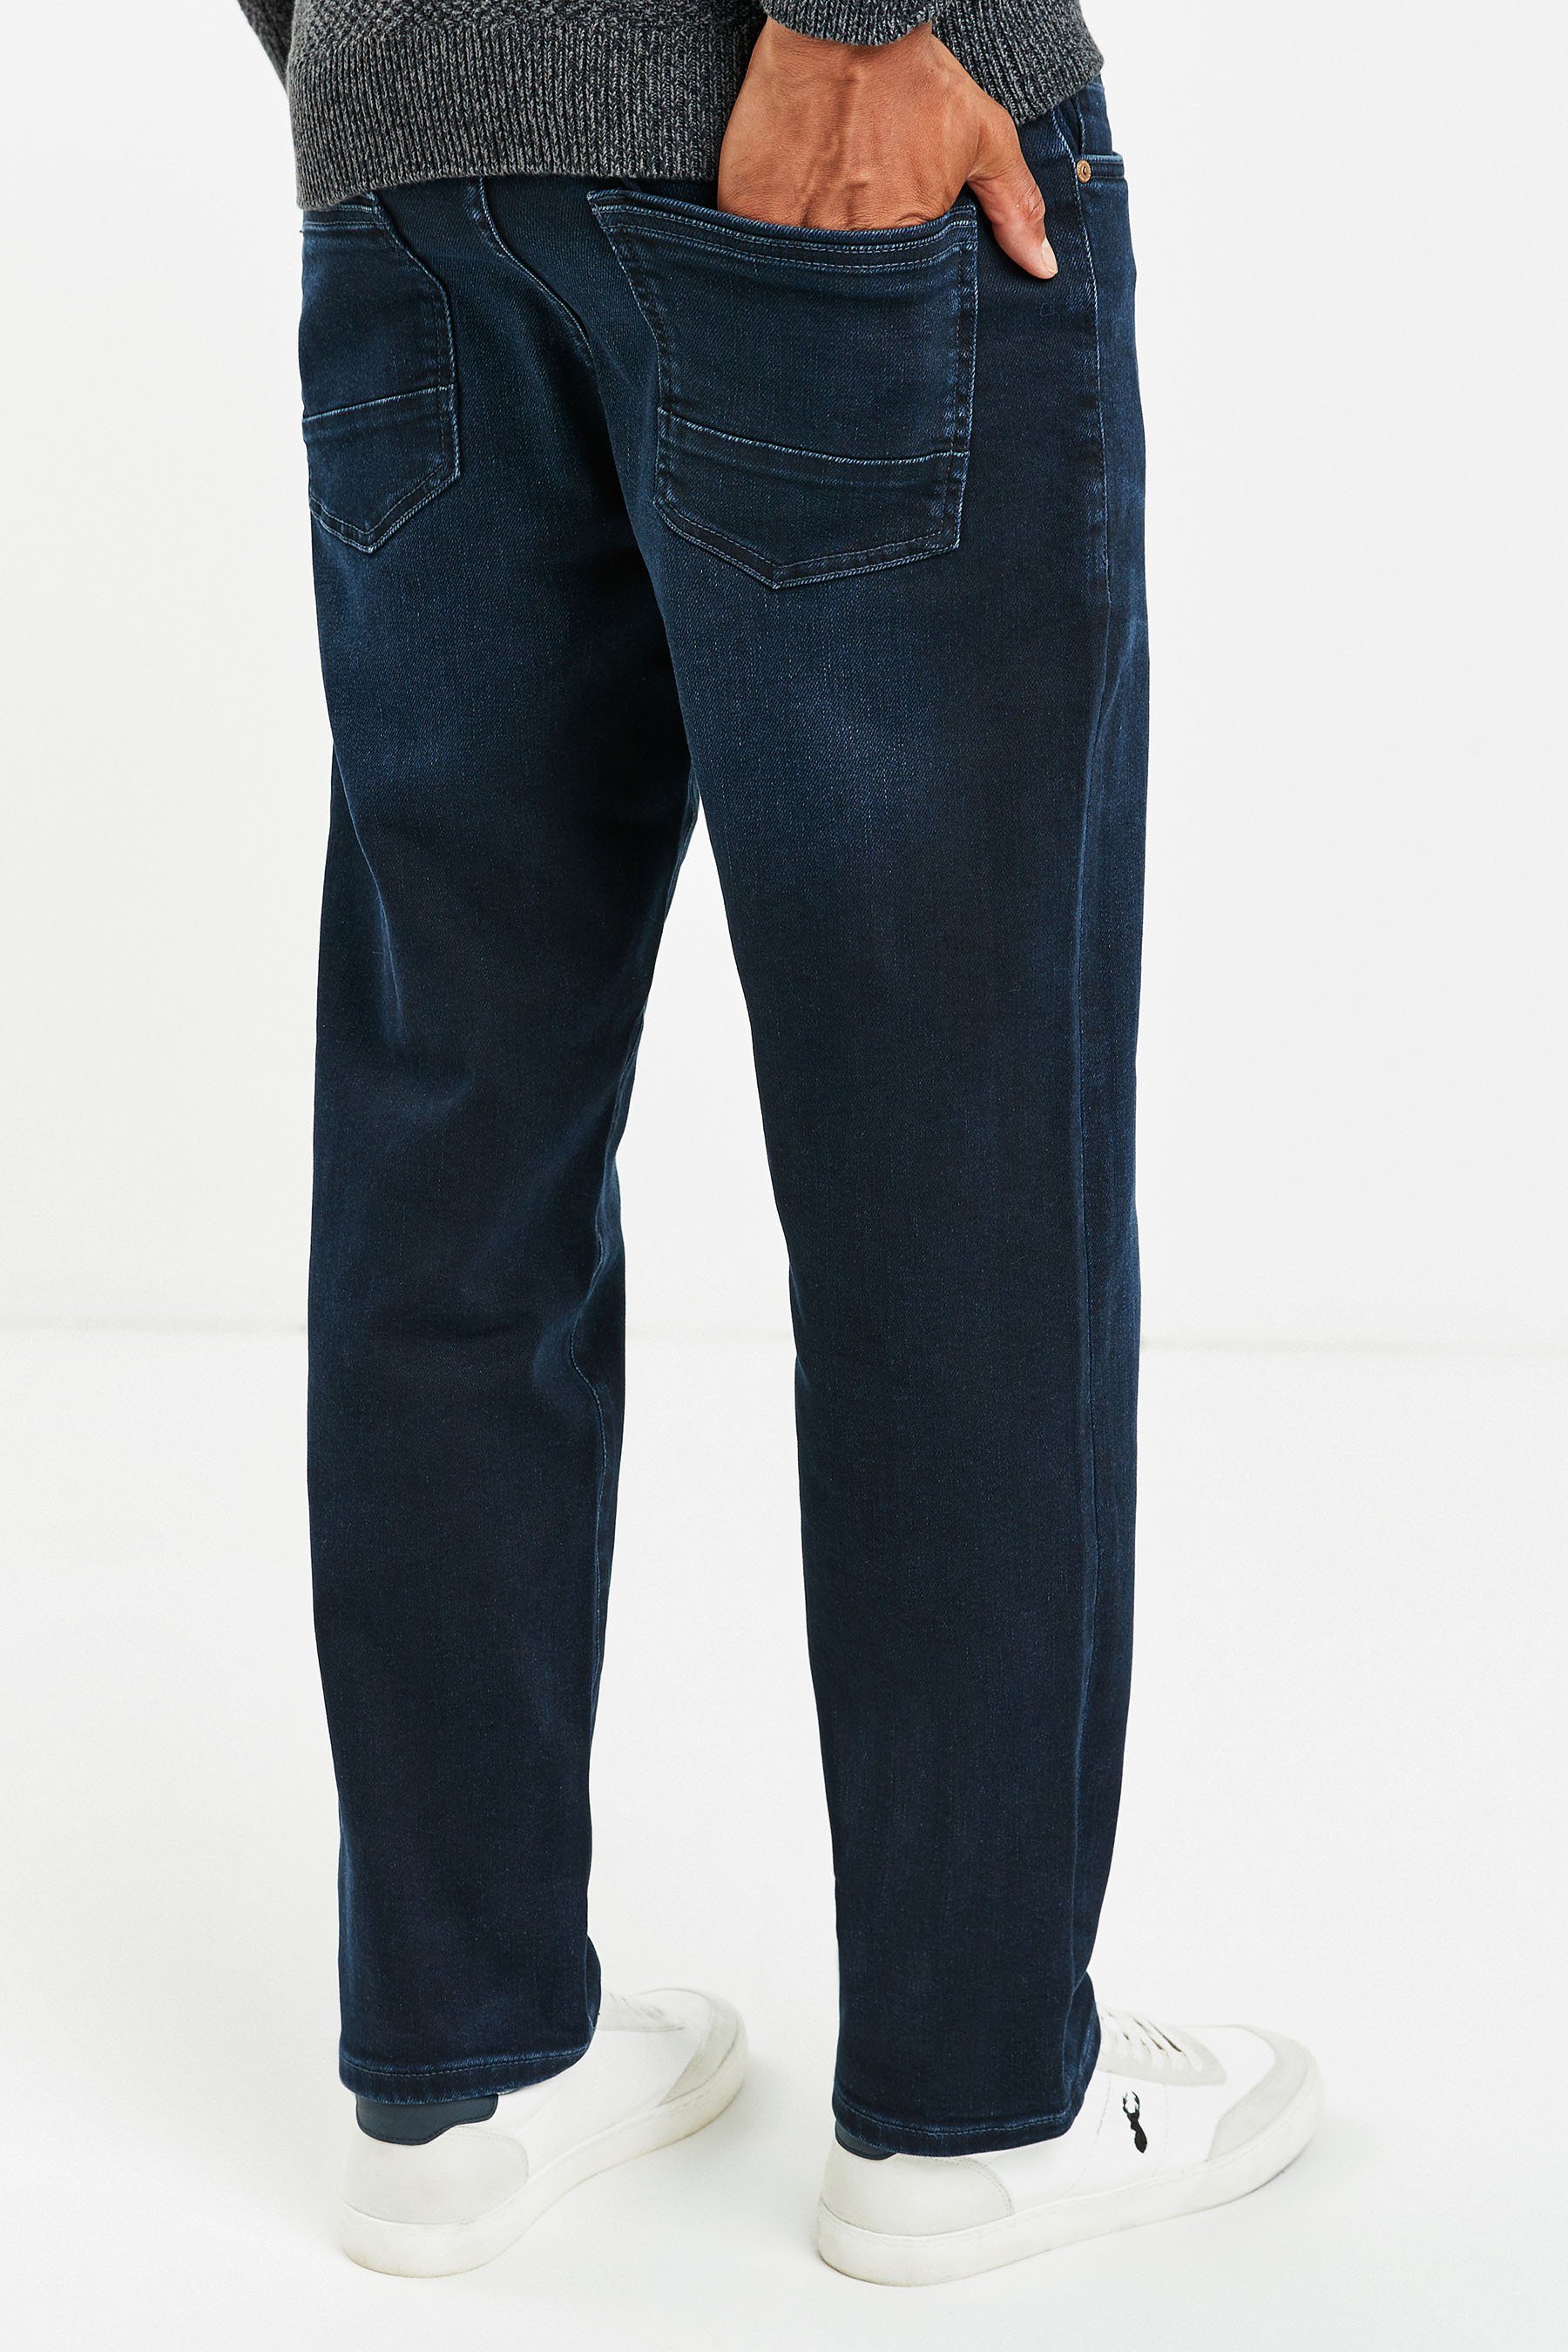 Next Ink (2-tlg) Blue Straight-Jeans